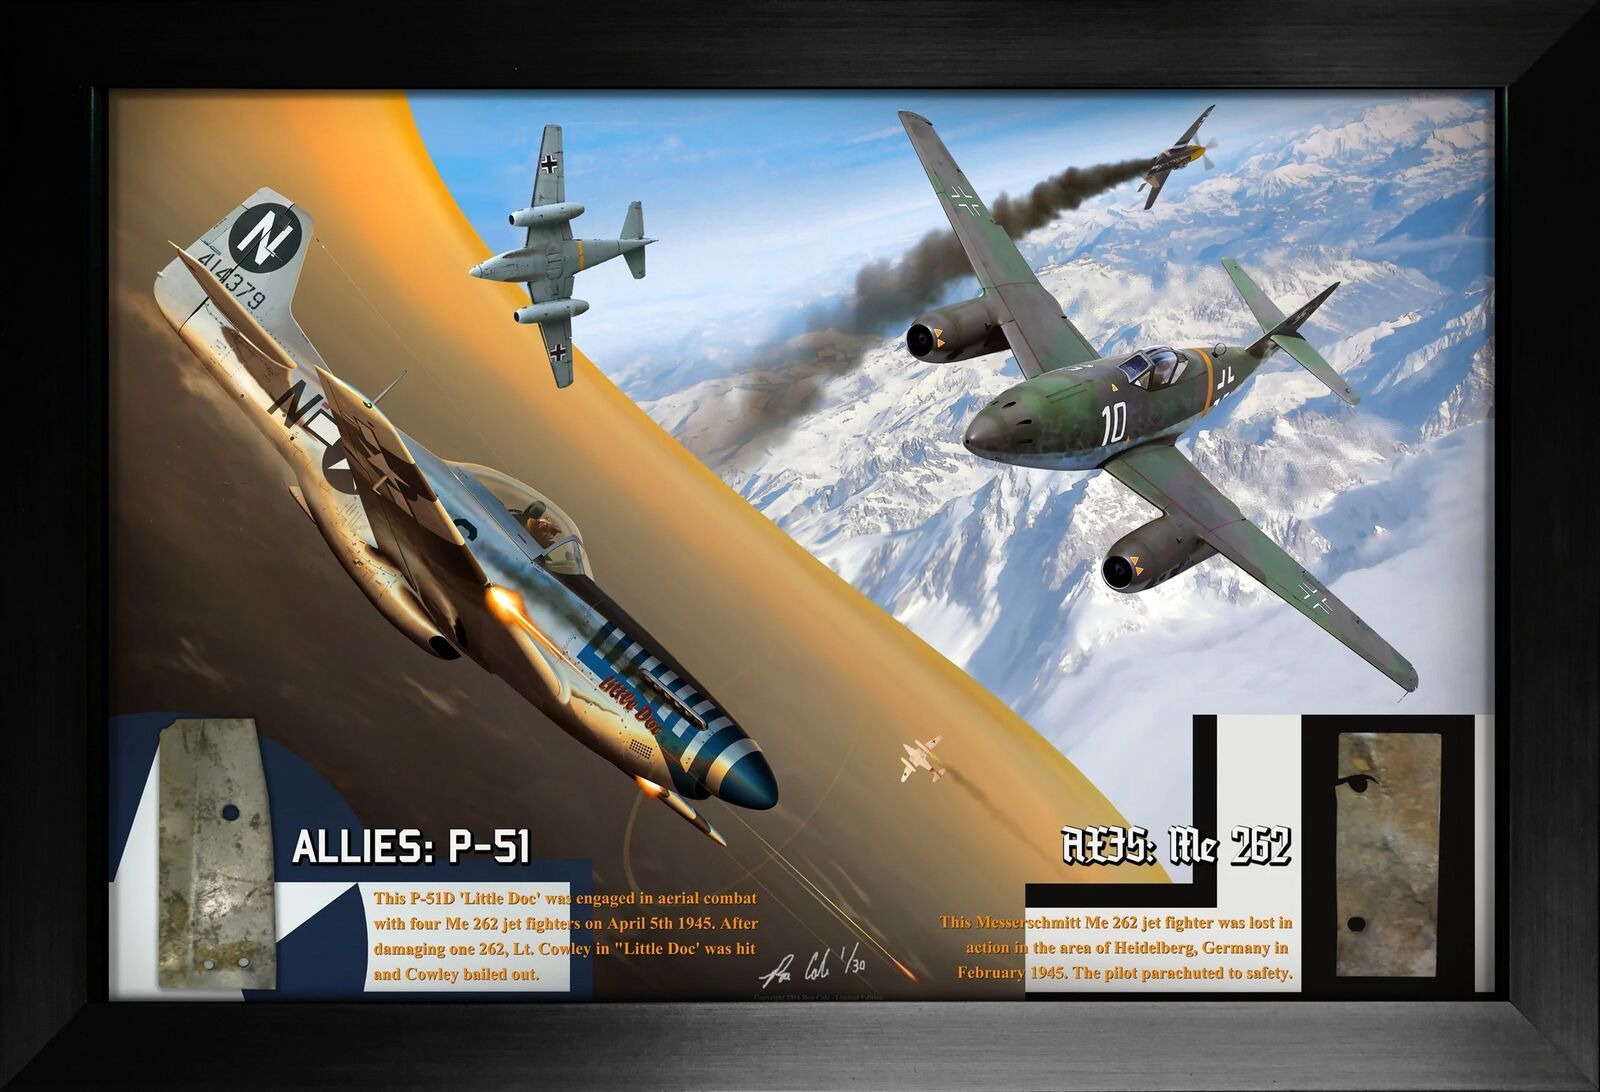 ALLIED & AXIS: P-51 Mustang & Me 262 Combat Losses Display